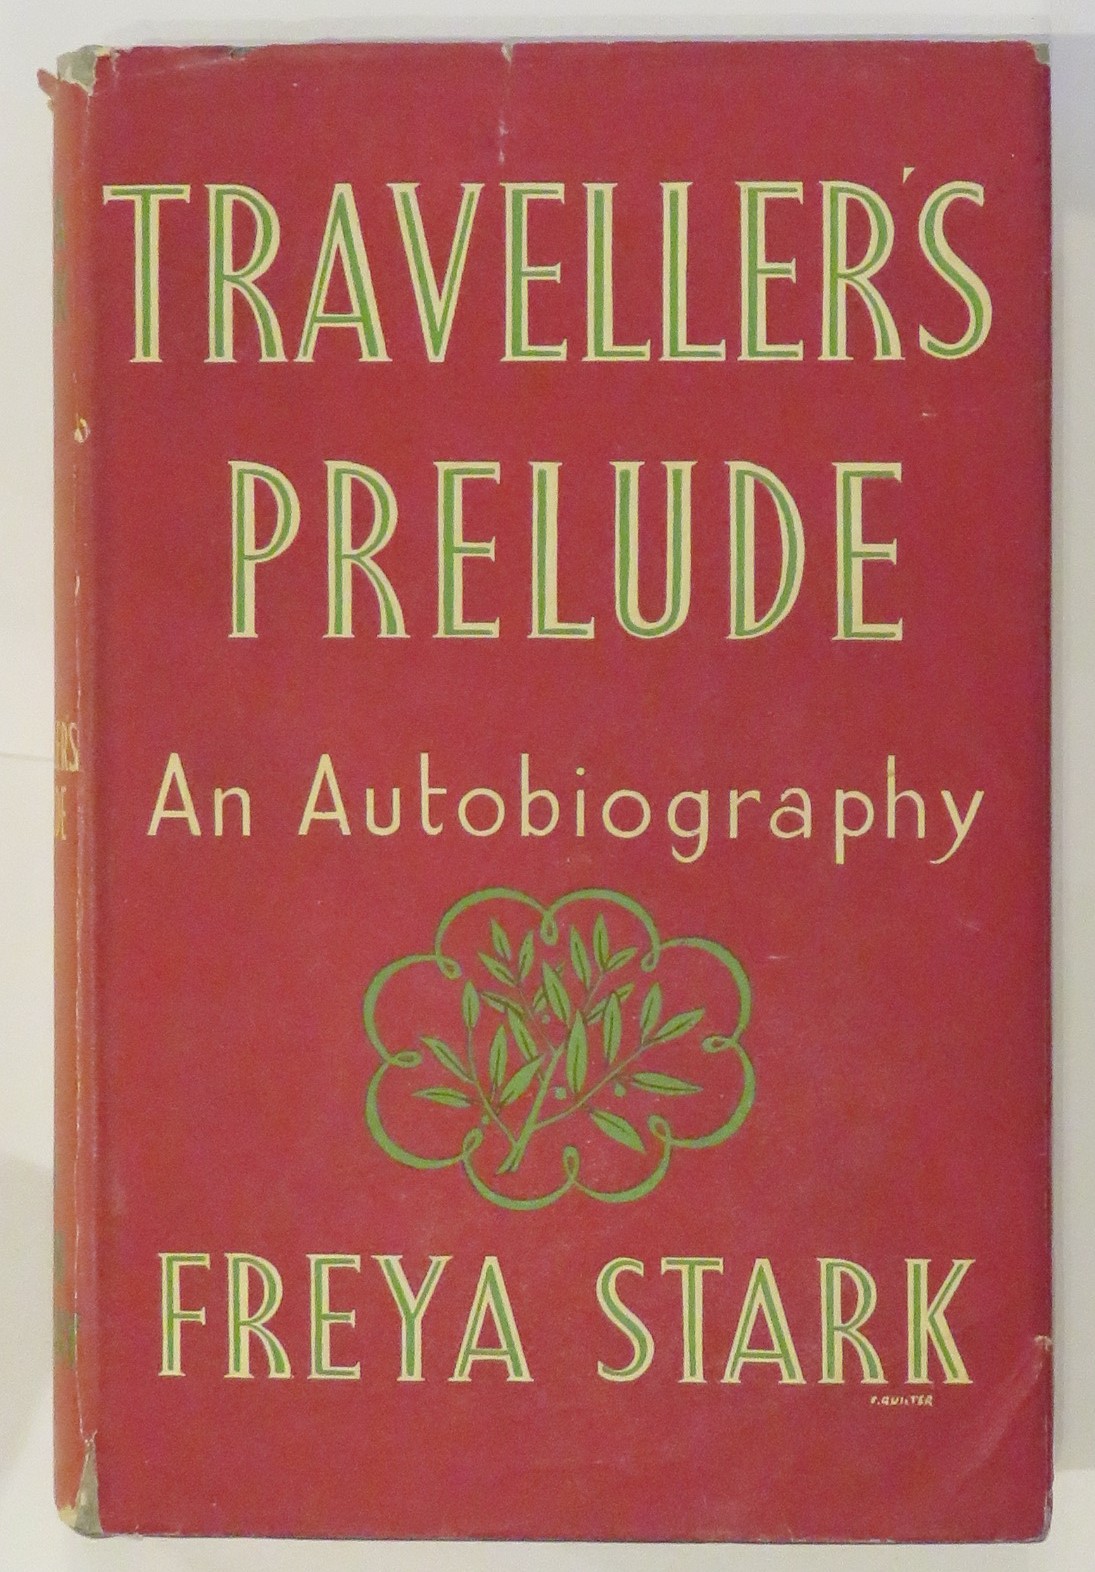 Traveller's Prelude: An Autobiography